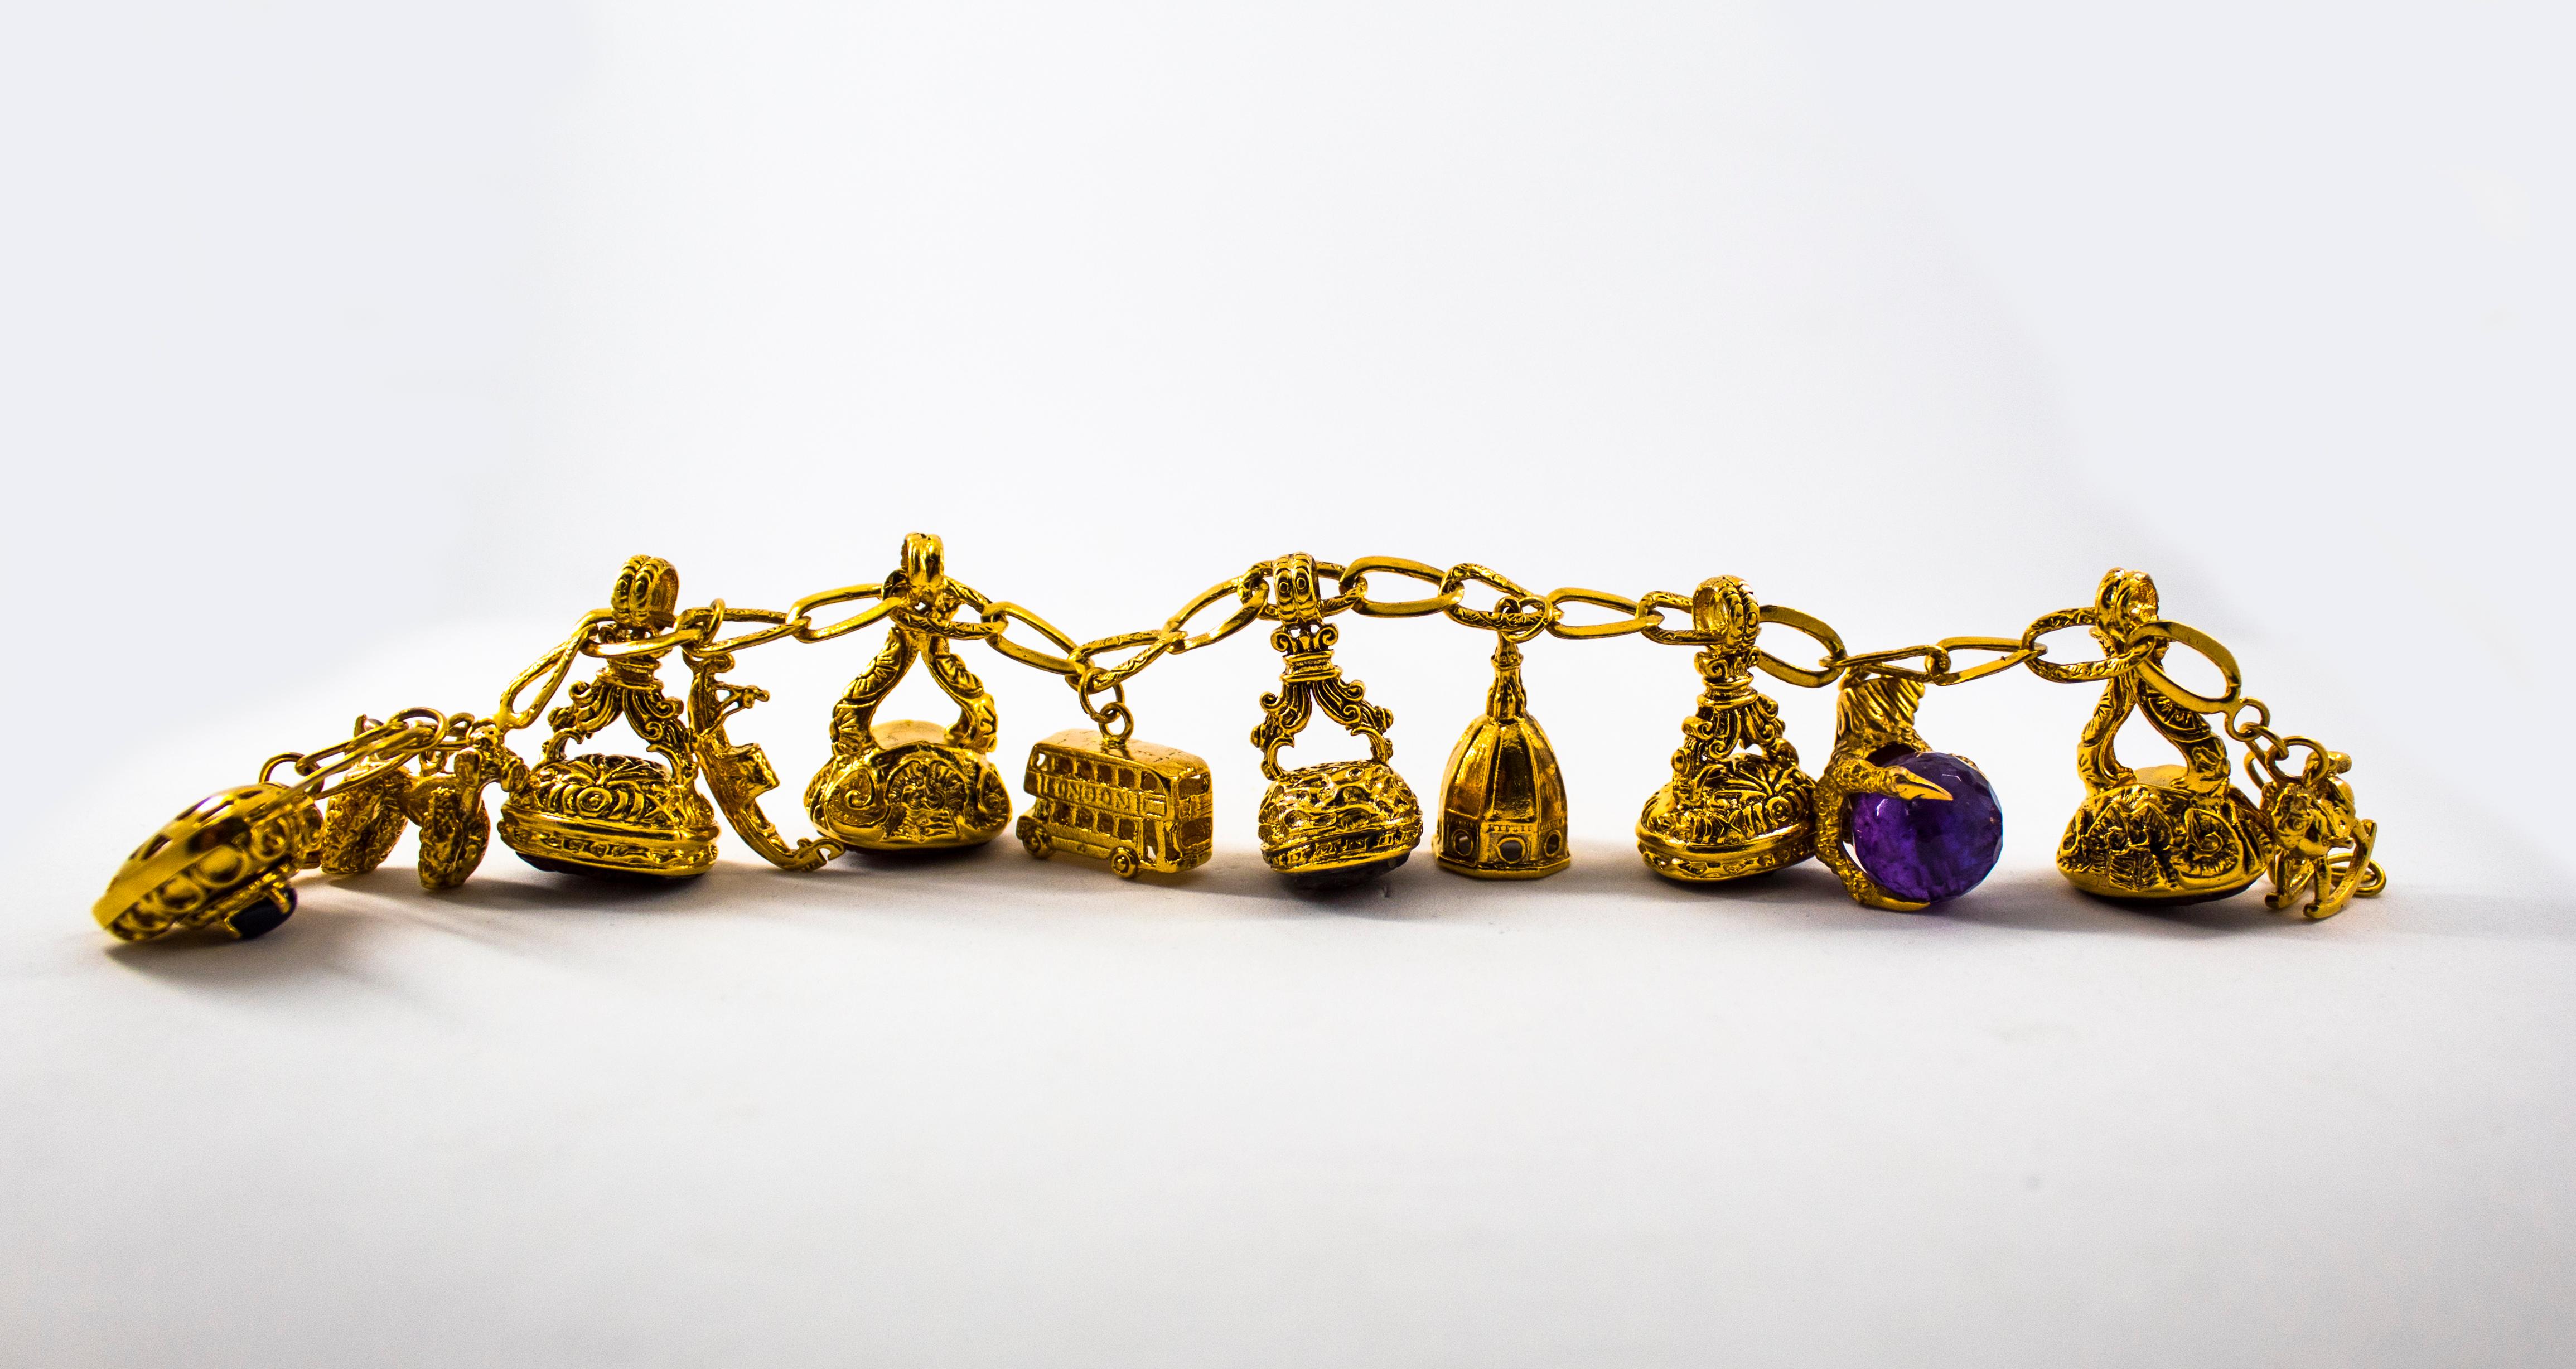 This Charm Bracelet is made of 9K Yellow Gold.
This Bracelet has a 0.50 Carats Blue Sapphire.
This Bracelet has also Carnelian.
This Bracelet has an 8.00 Carats Amethyst.
We're a workshop so every piece is handmade, customizable and resizable.